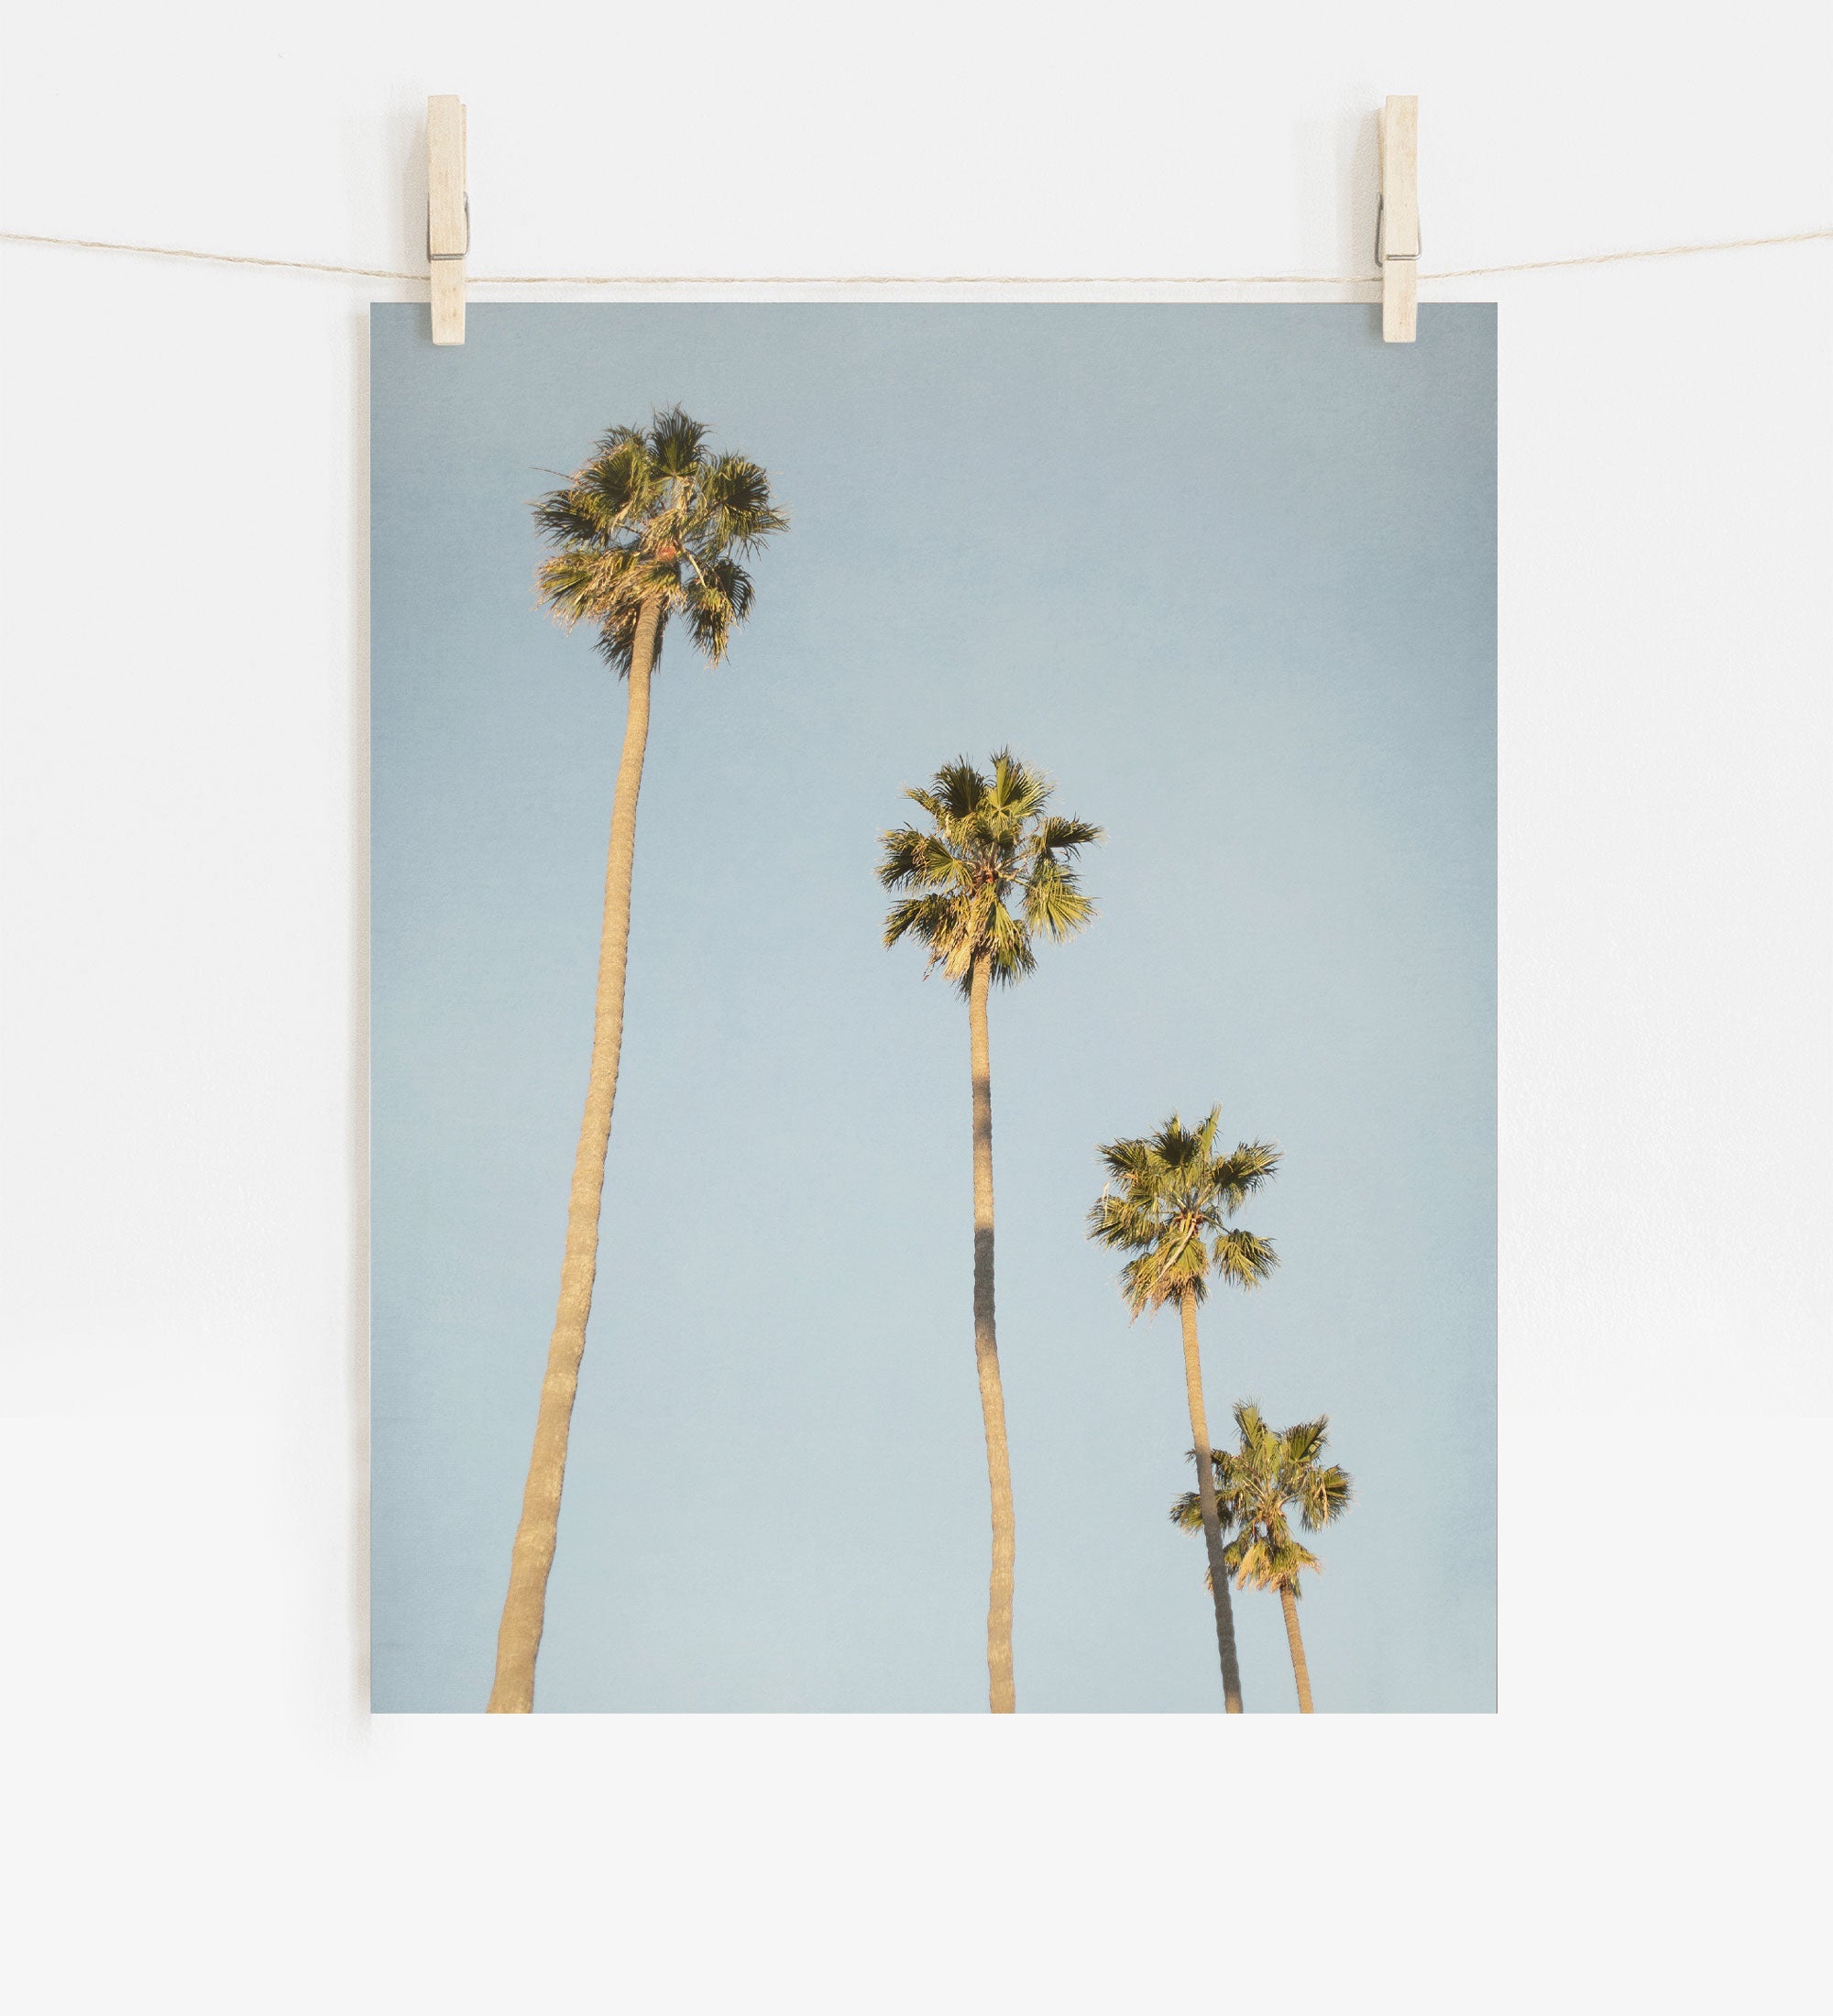 A photograph of Los Angeles Palm Tree Photographic Print &#39;Palm Stairs to Heaven&#39;, by Offley Green, clipped to a string by two wooden clothespins at the top, hanging against a white wall.